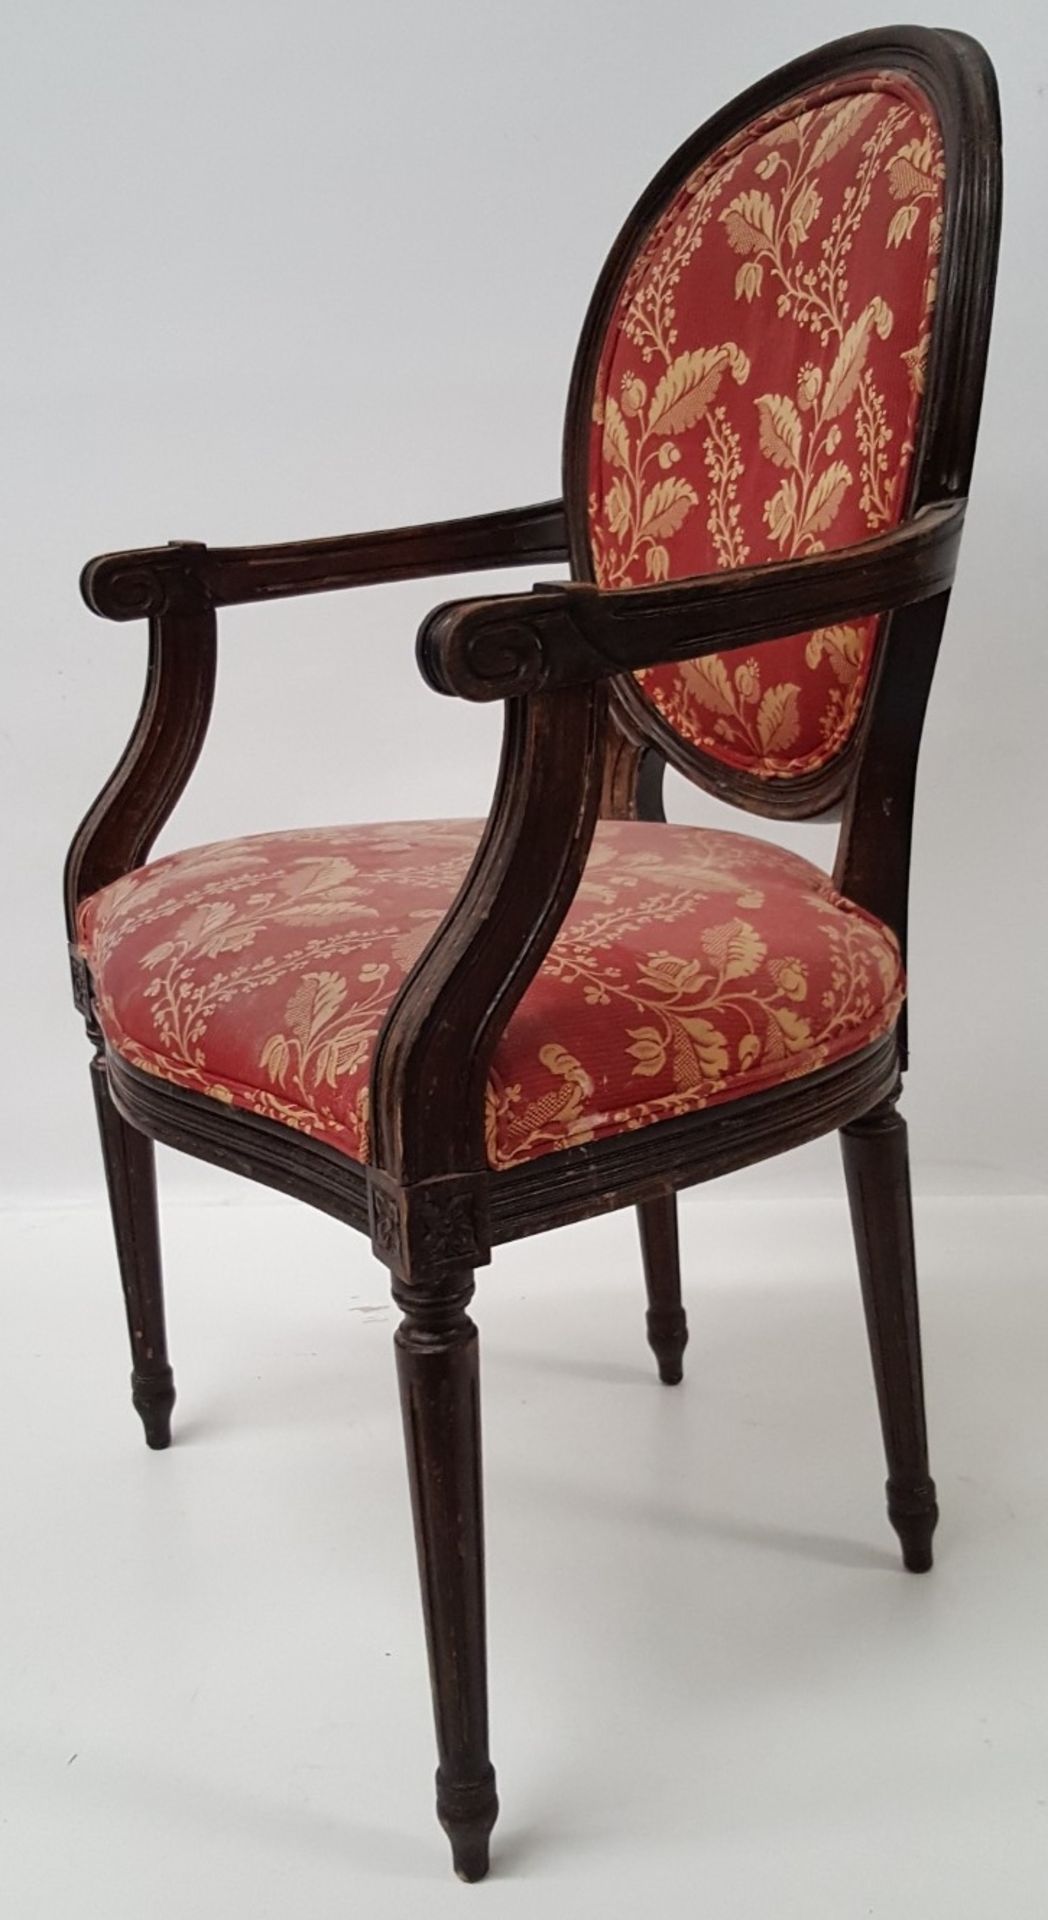 6 x Antique Style Wooden Chairs Upholstered In Red Fabric With Gold Leaf Design - CL431 - Image 3 of 8